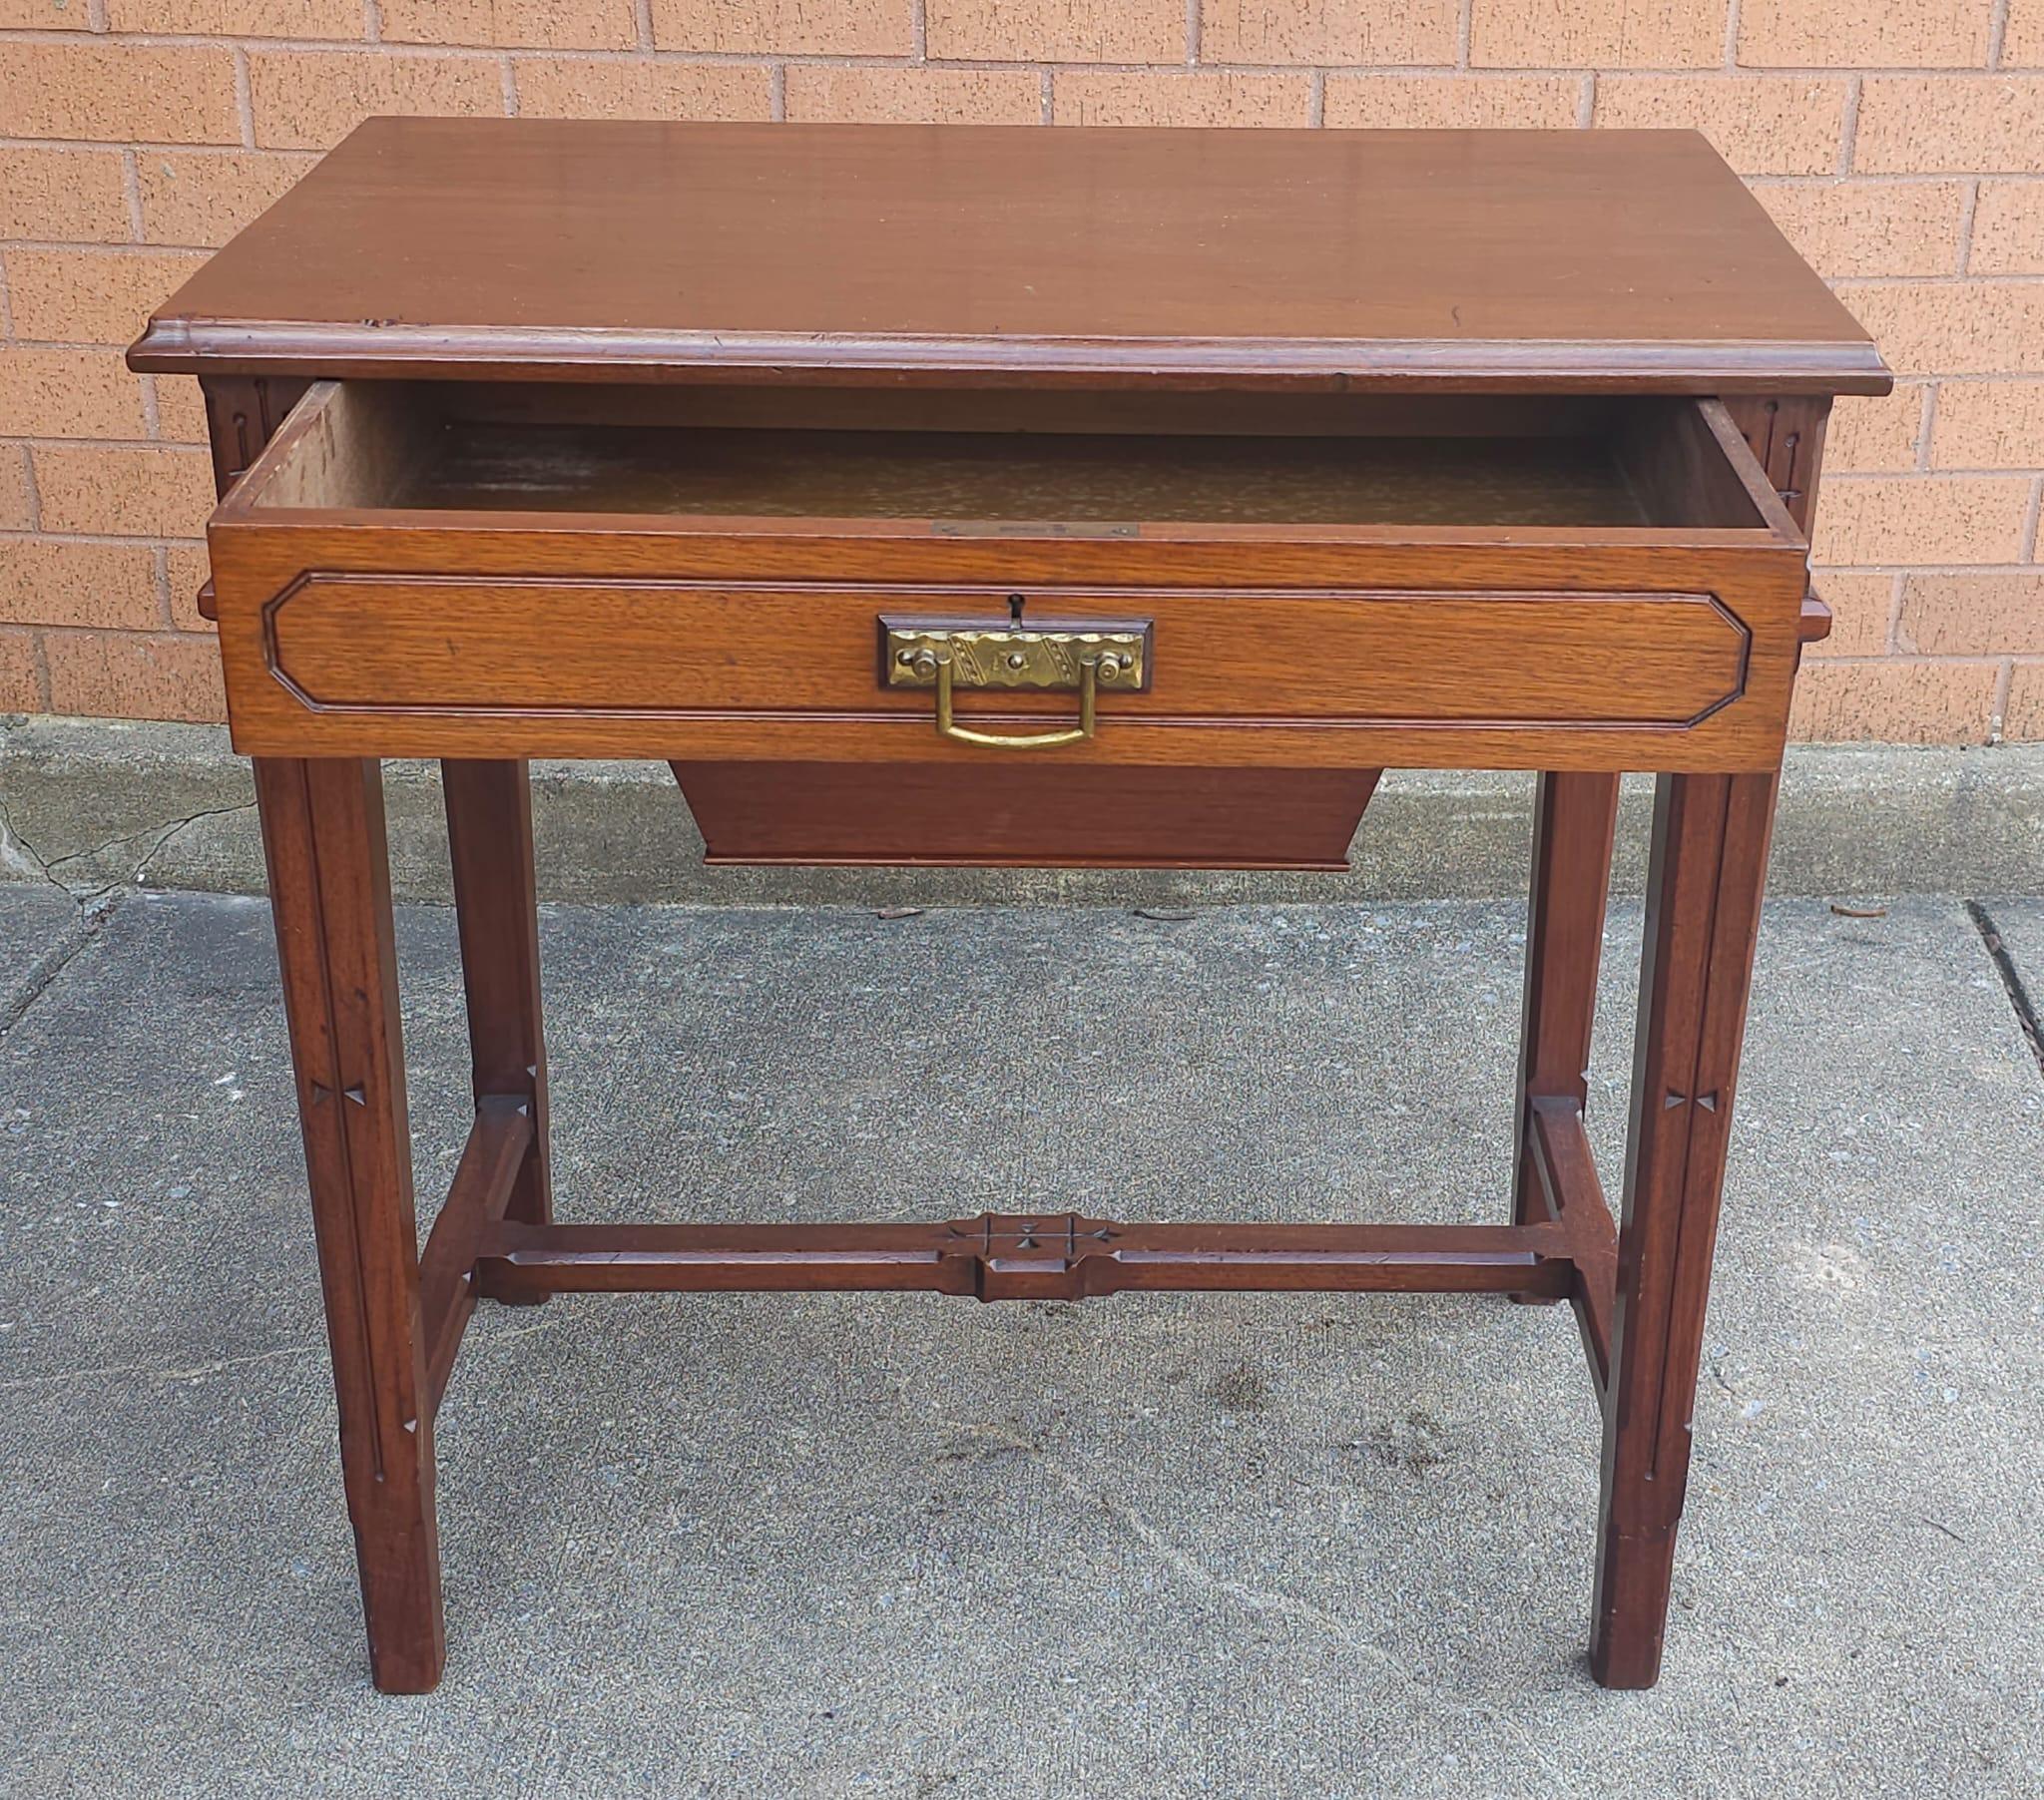 An early 20th Century Victorian Style Mahogany Work Table or Sewing Table in great antique condition. 

Measures 39.25